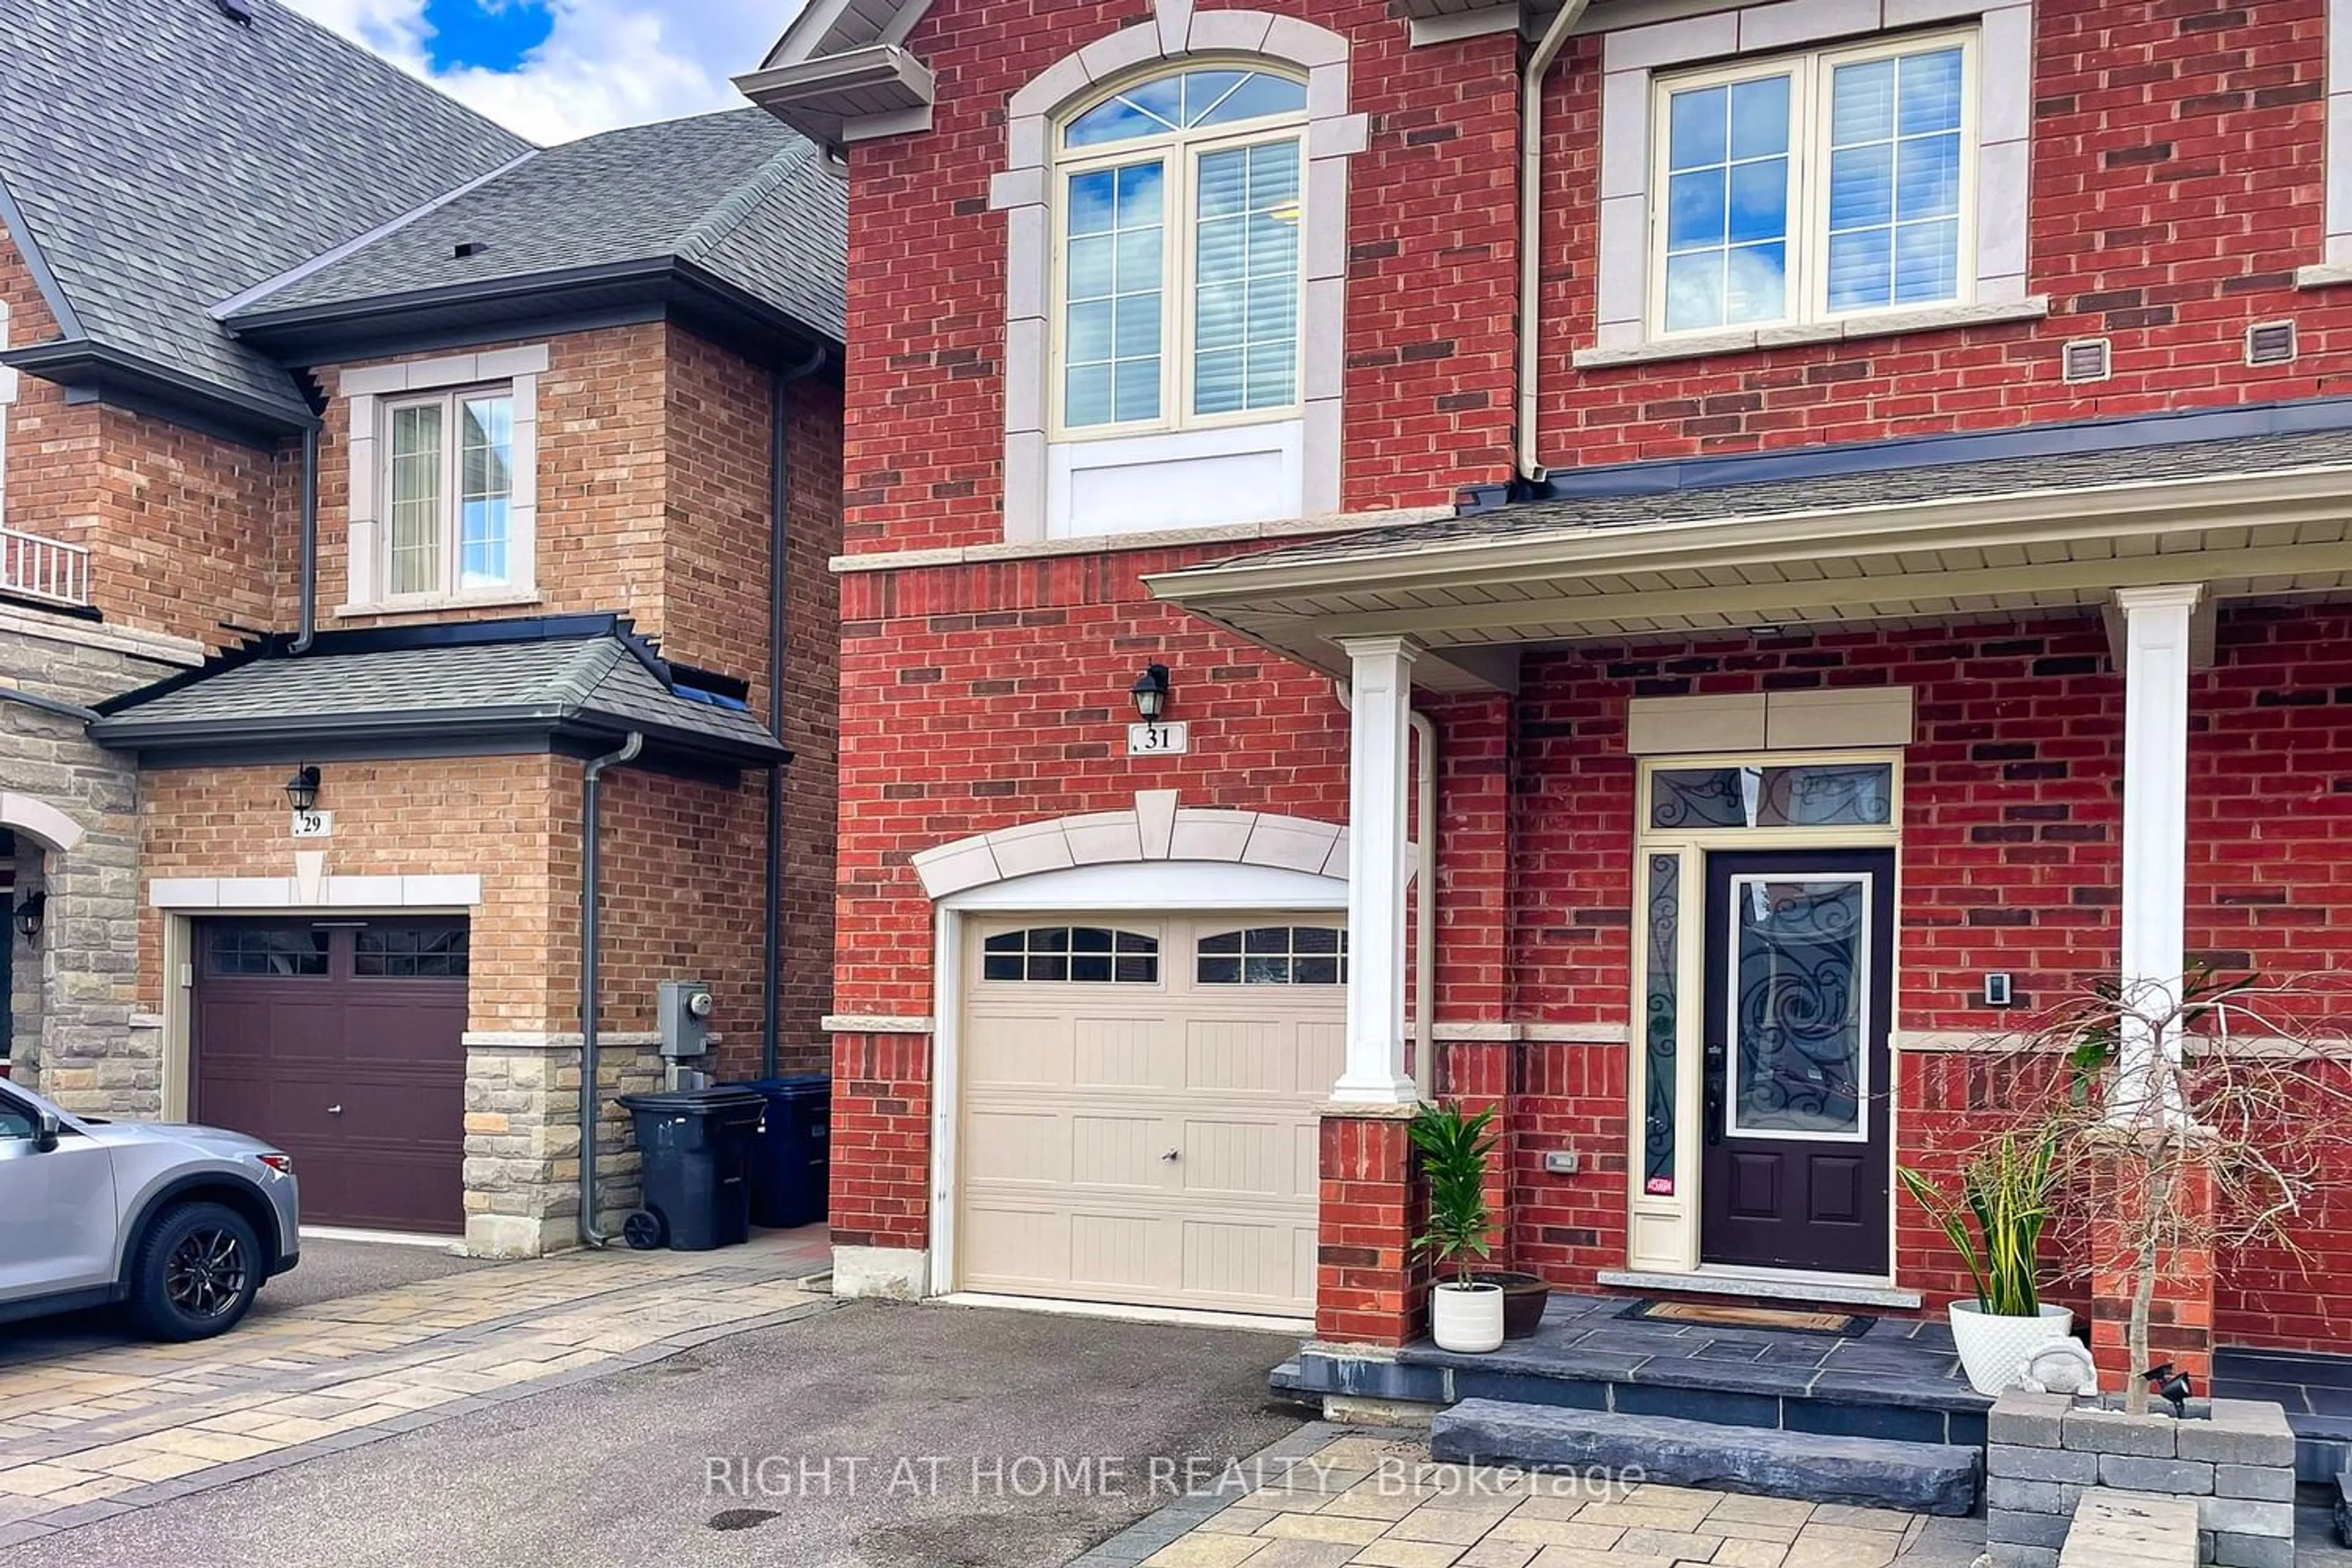 Home with brick exterior material for 31 Goldthread Terr, Toronto Ontario M3H 0B9